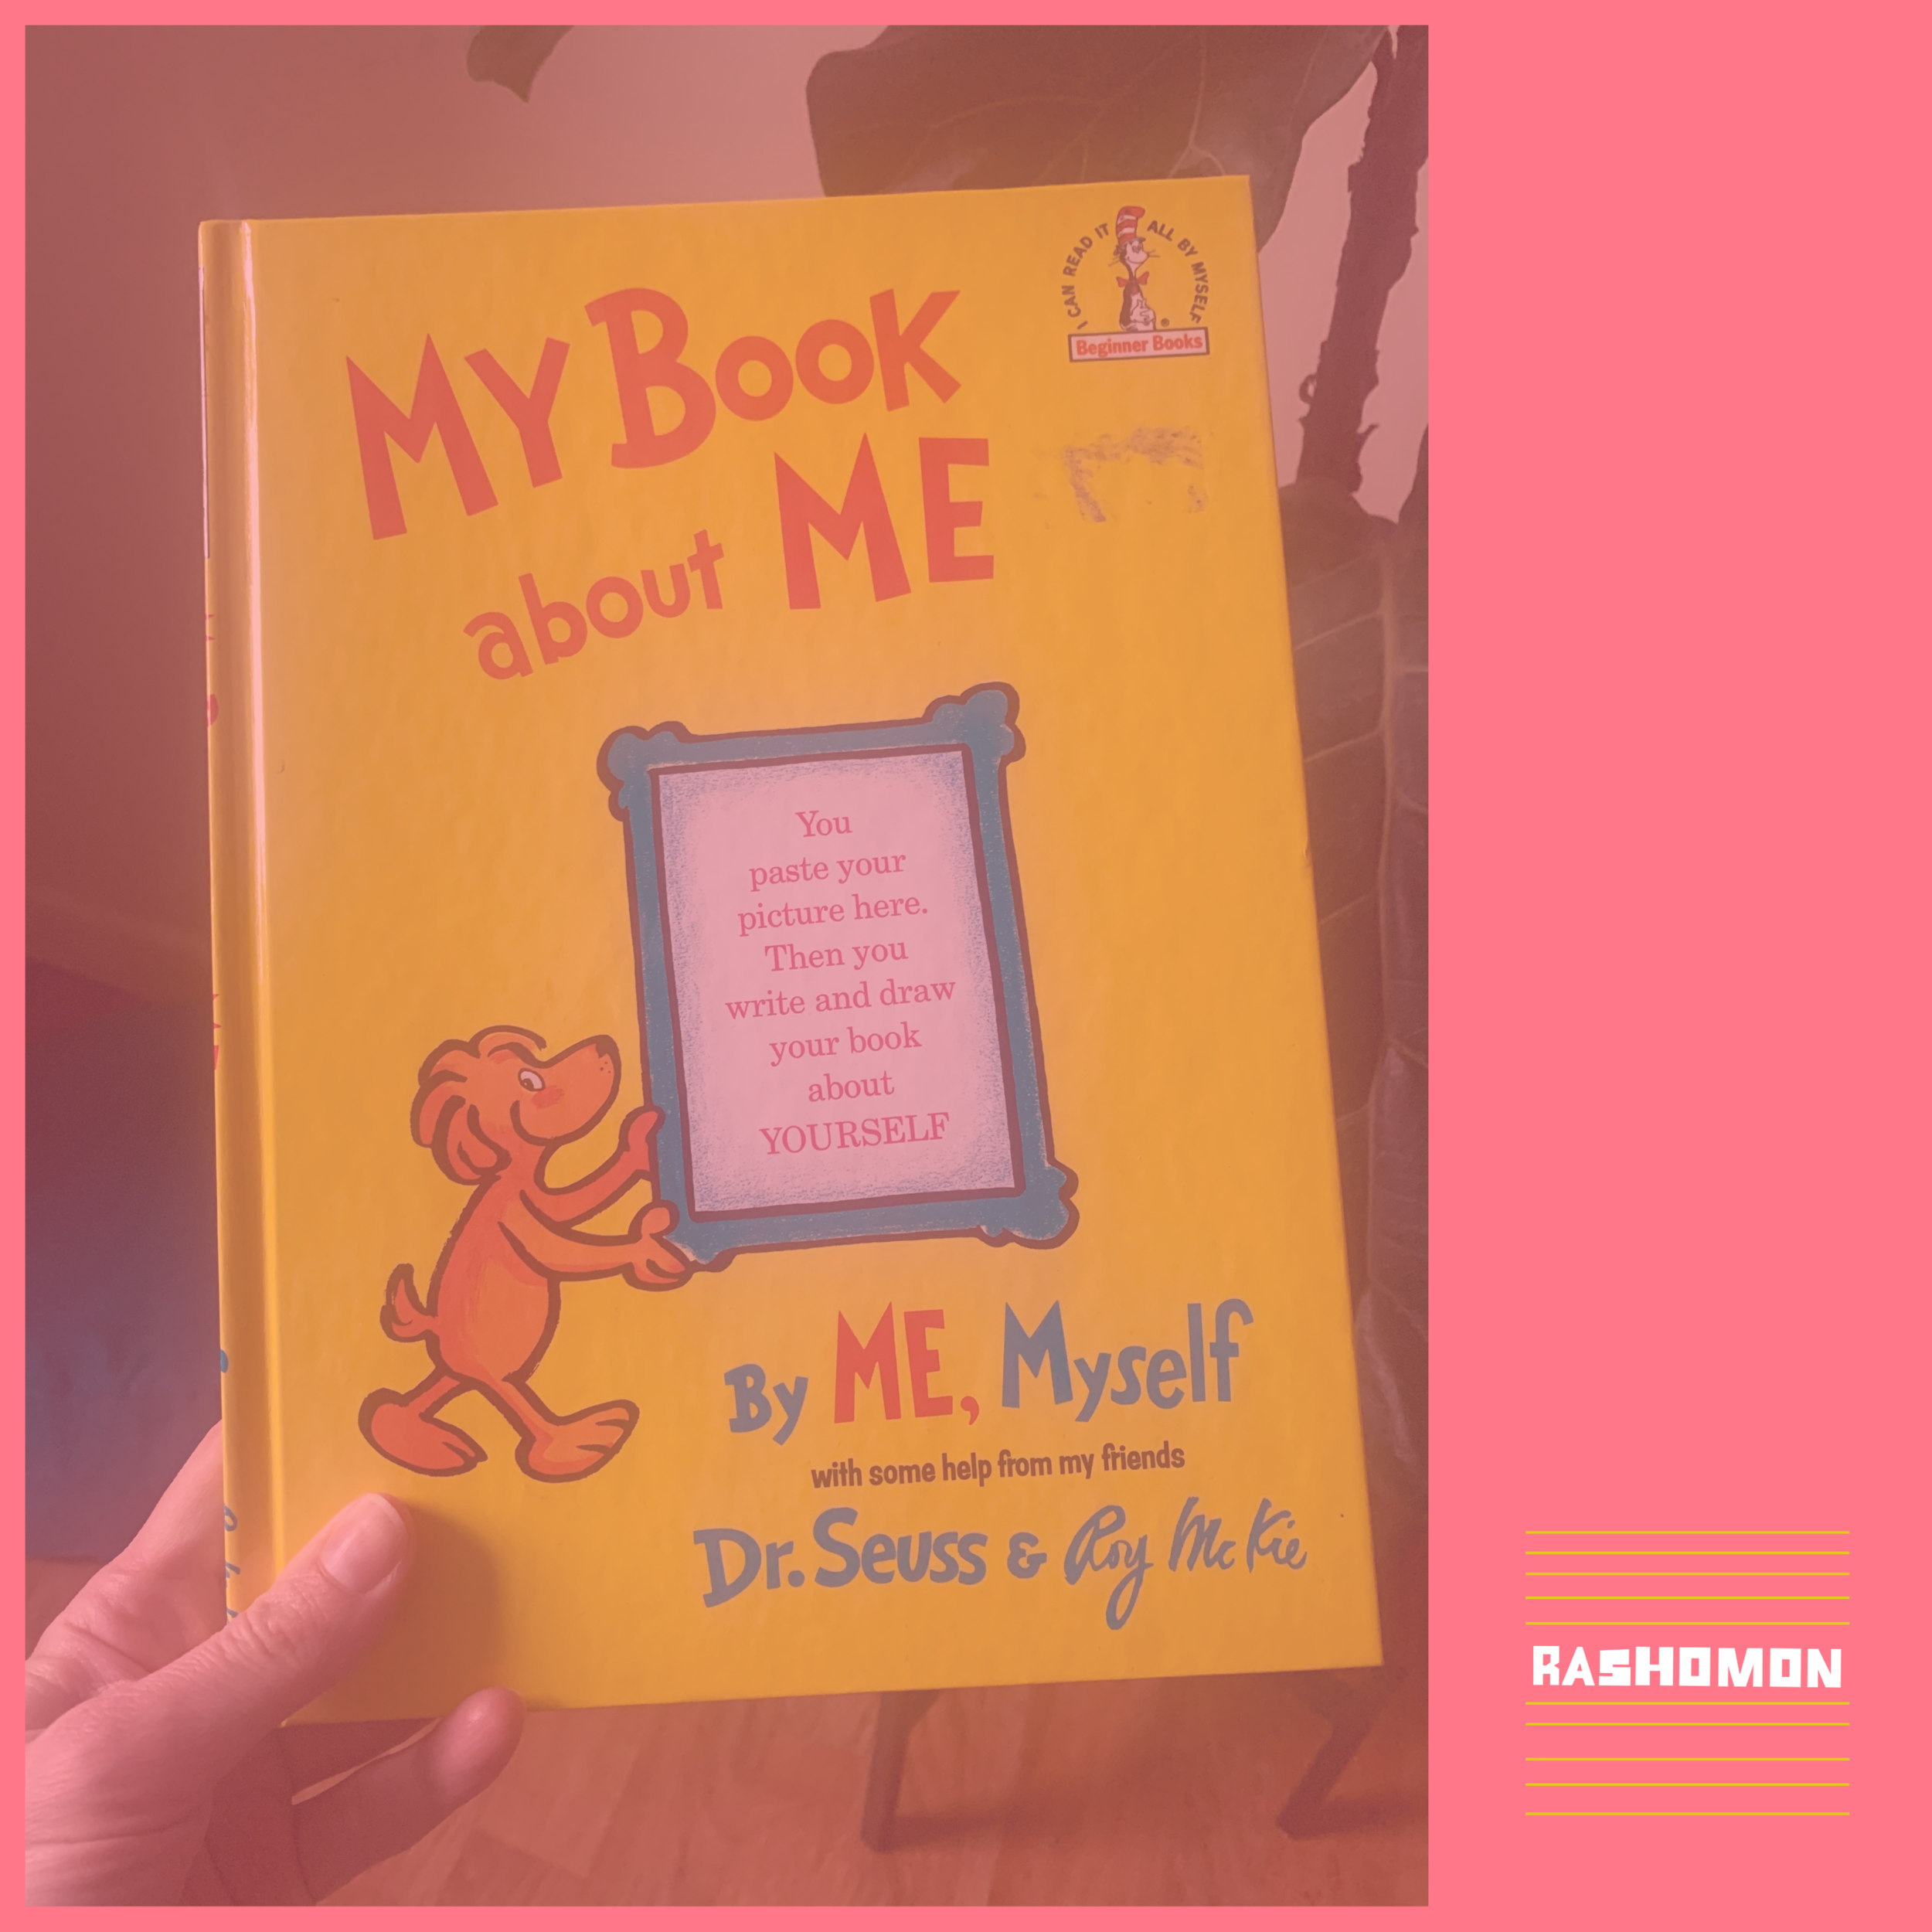 S3 E1: My Book About Me